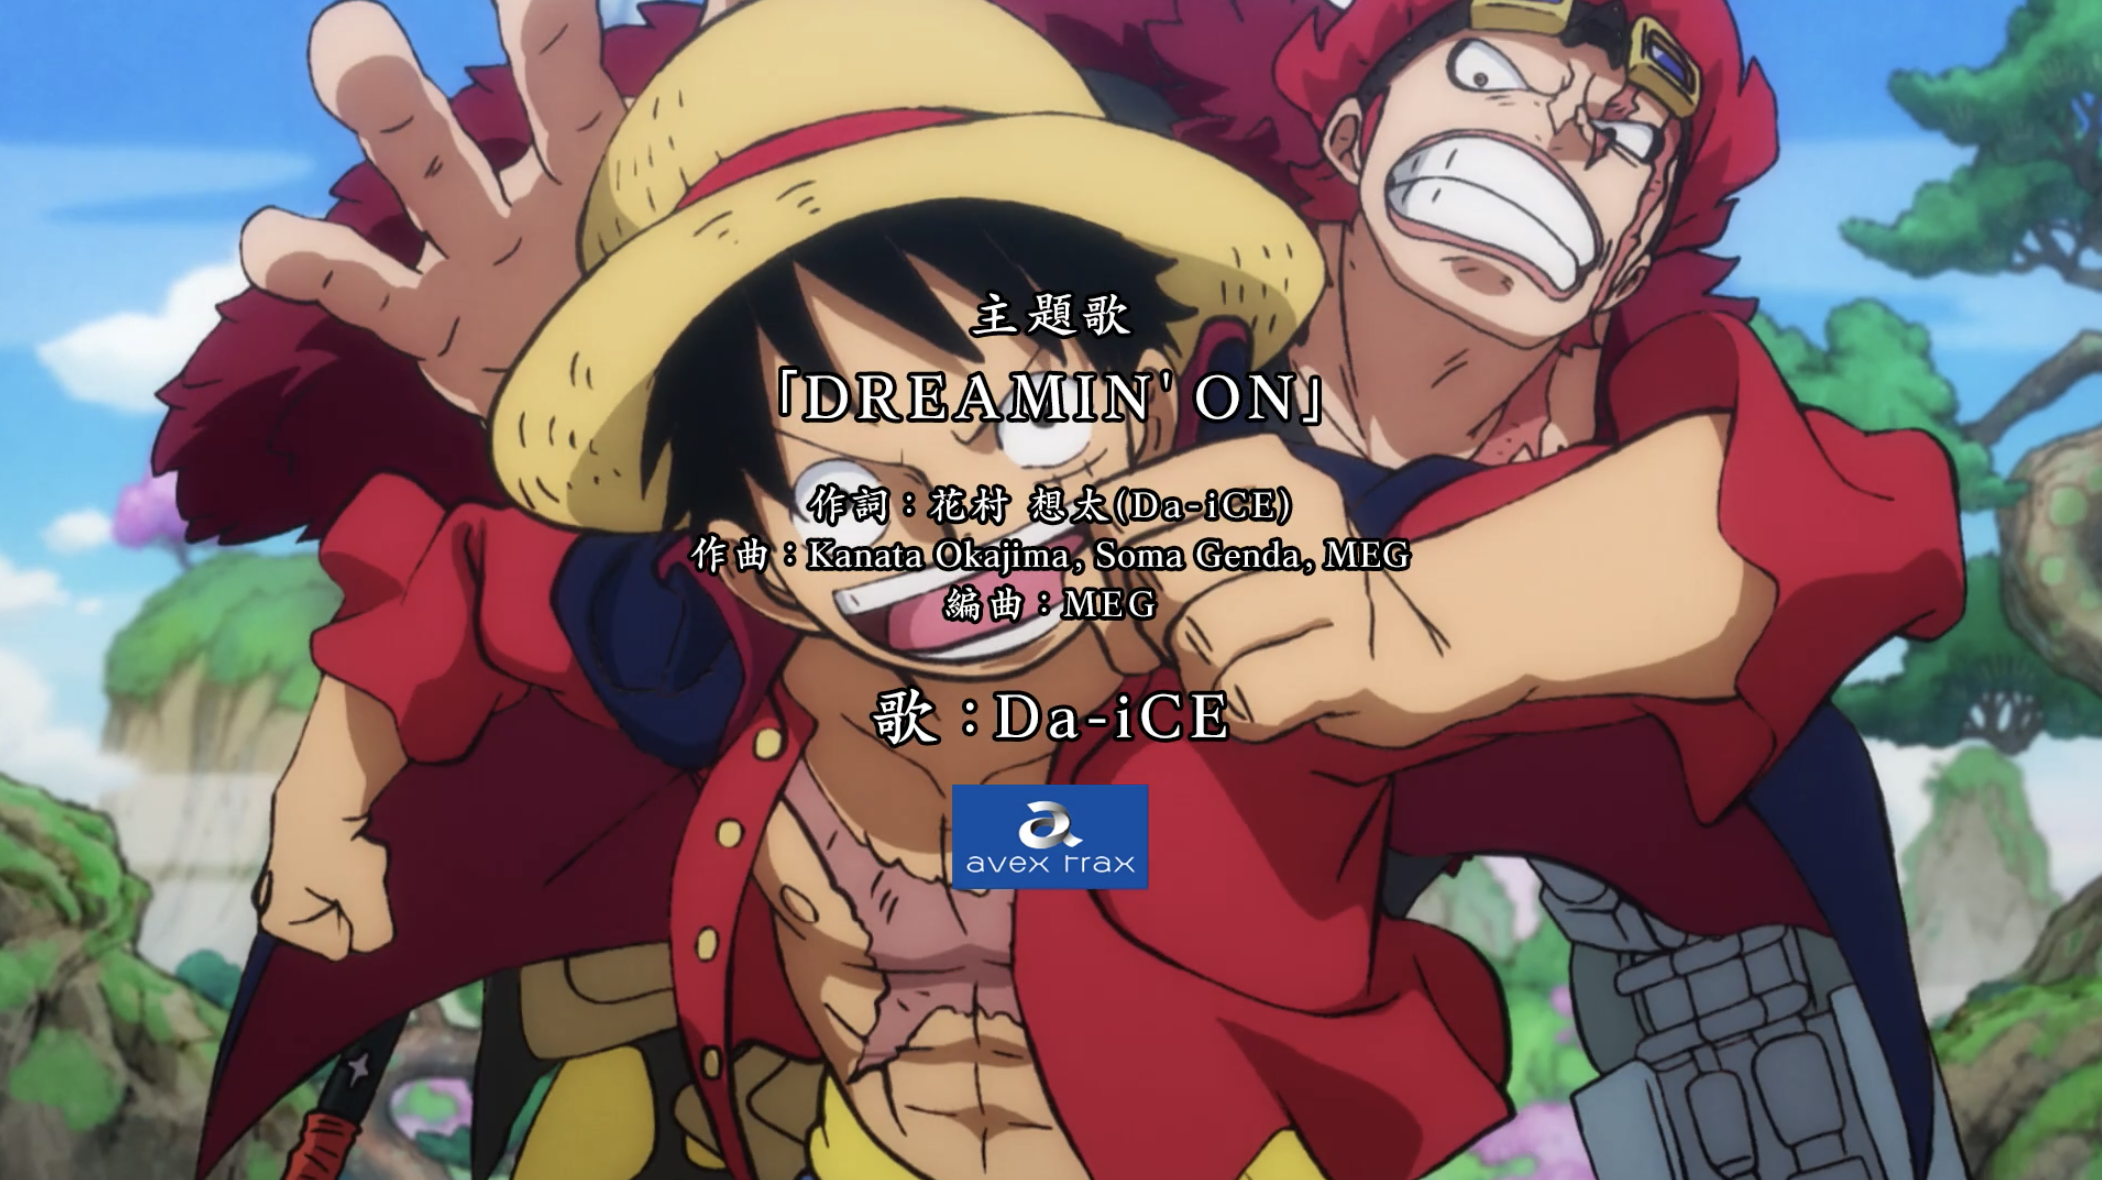 Toei Animation What Did You All Think Of The New Opening Intro Song For One Piece T Co Y4ylmpkijv Twitter